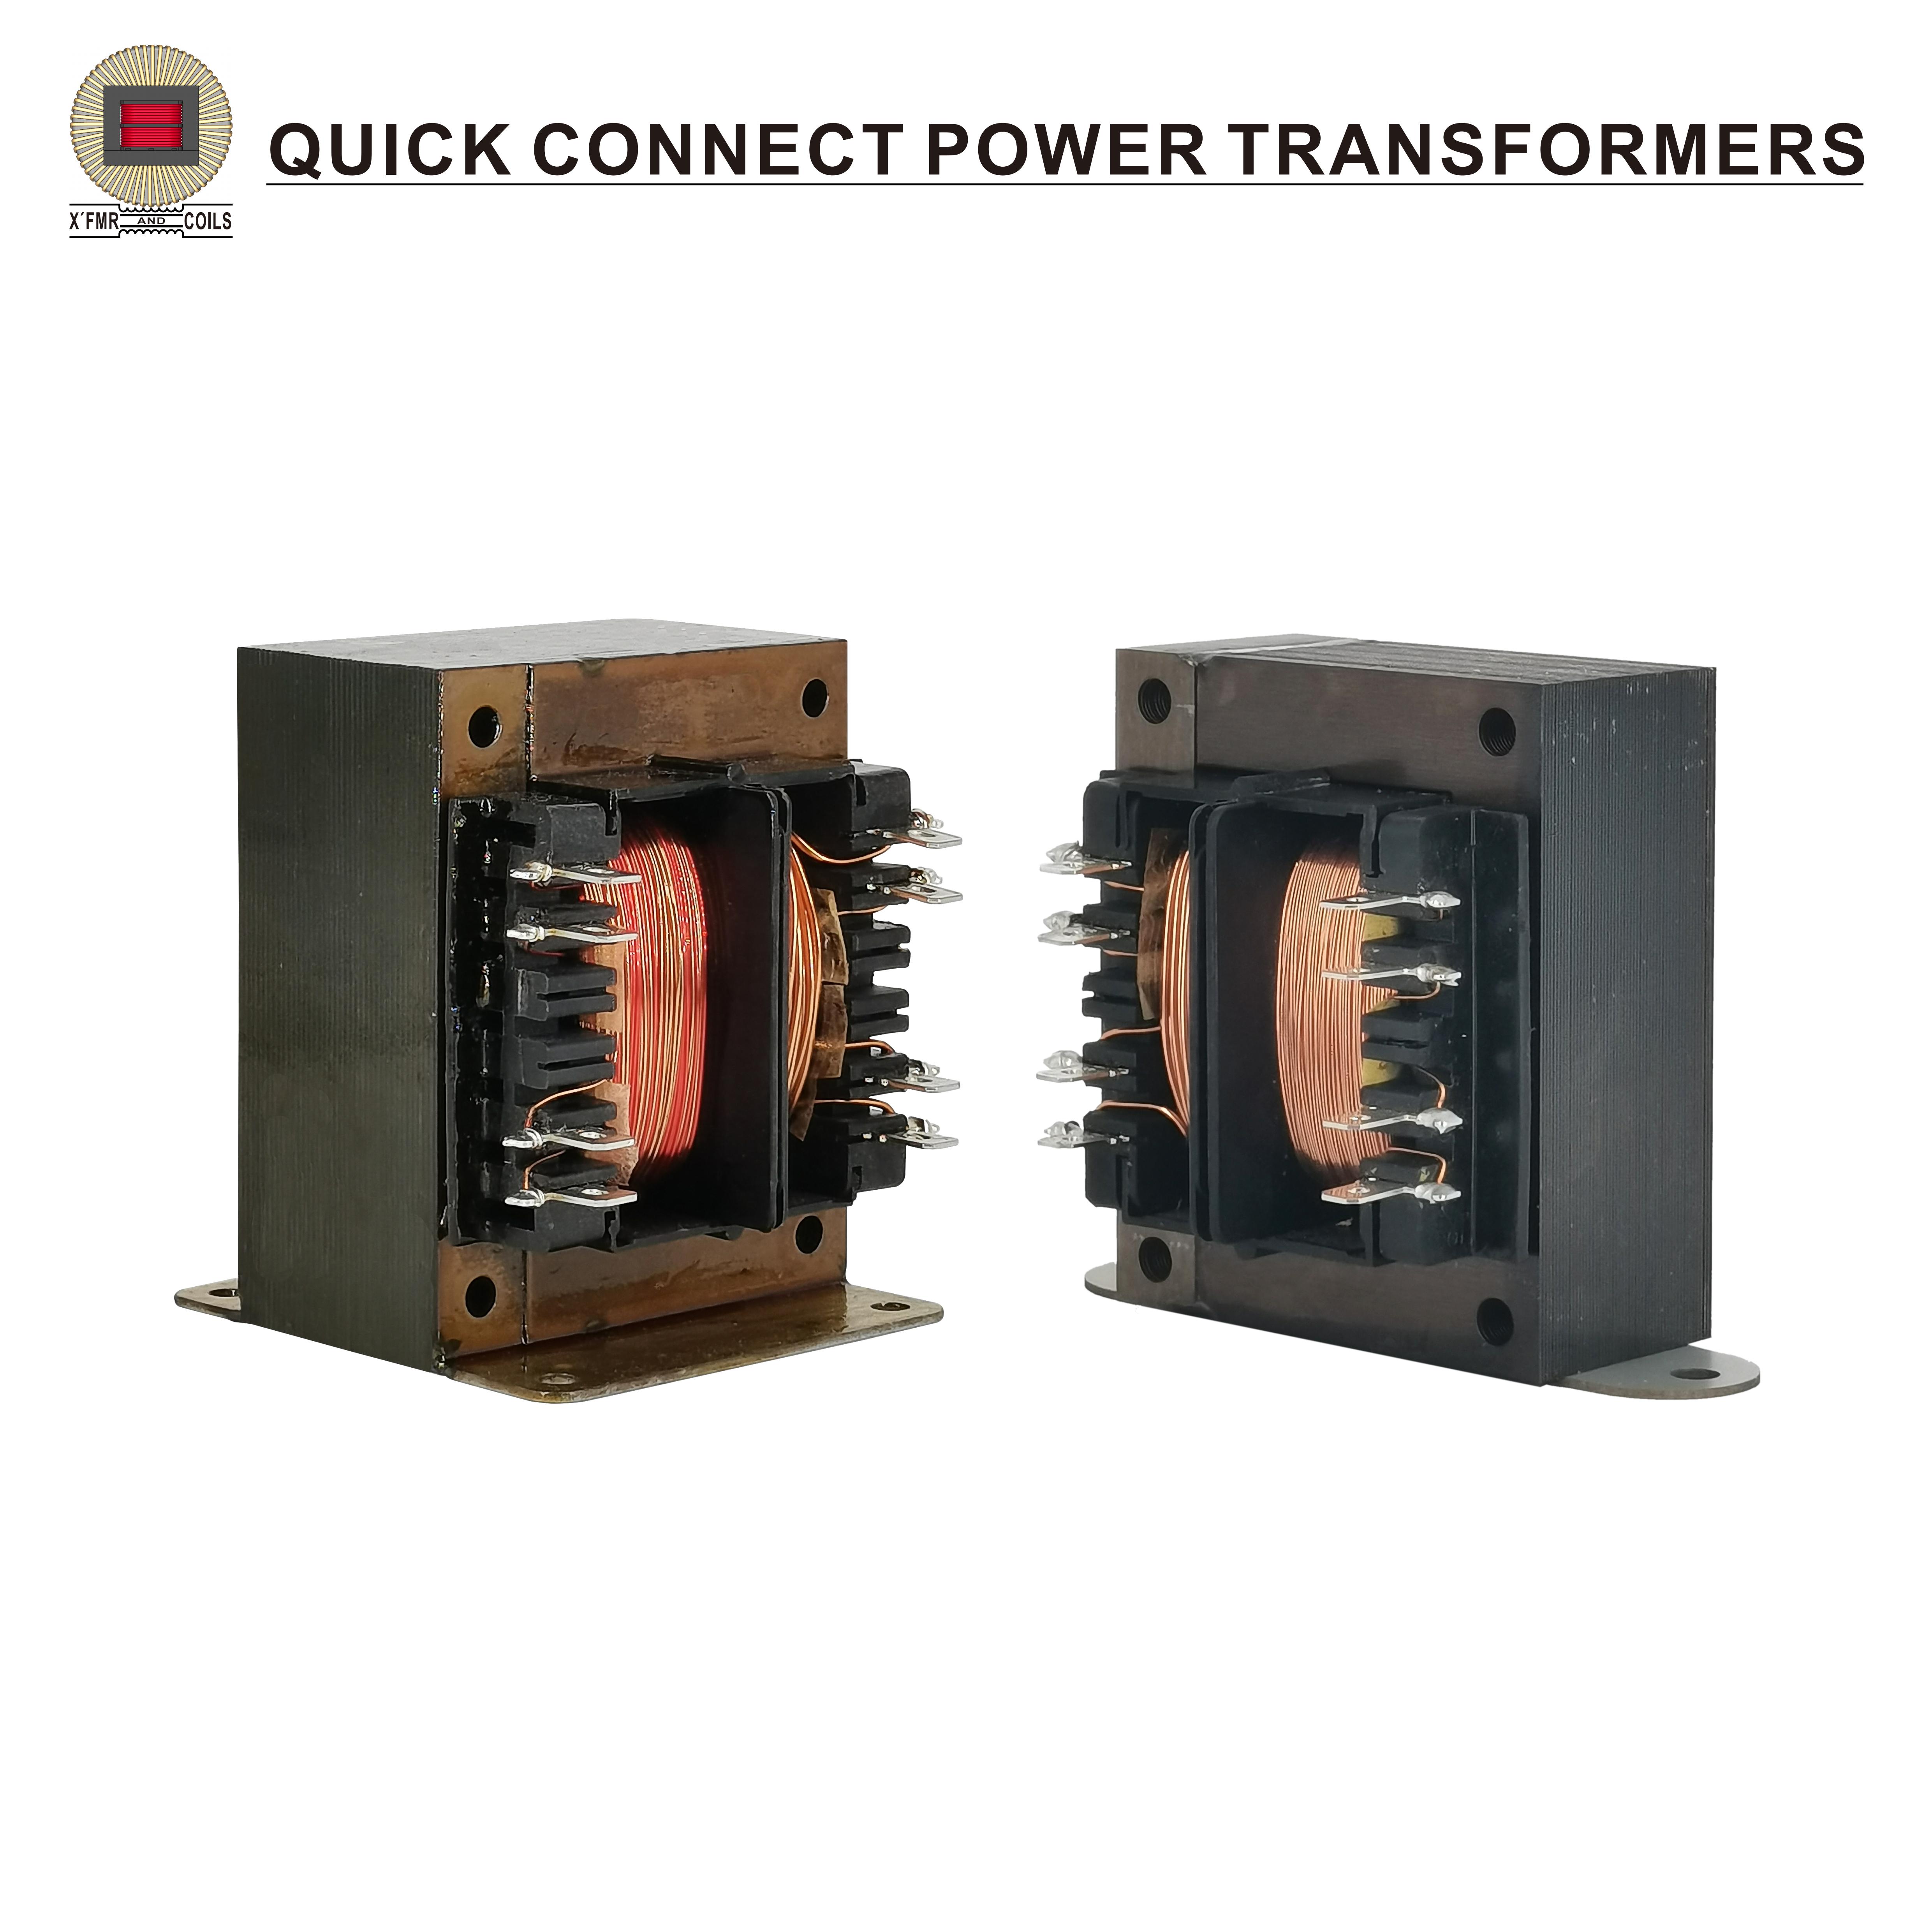 Quick Connect Power Transformers QCPT-02 Series